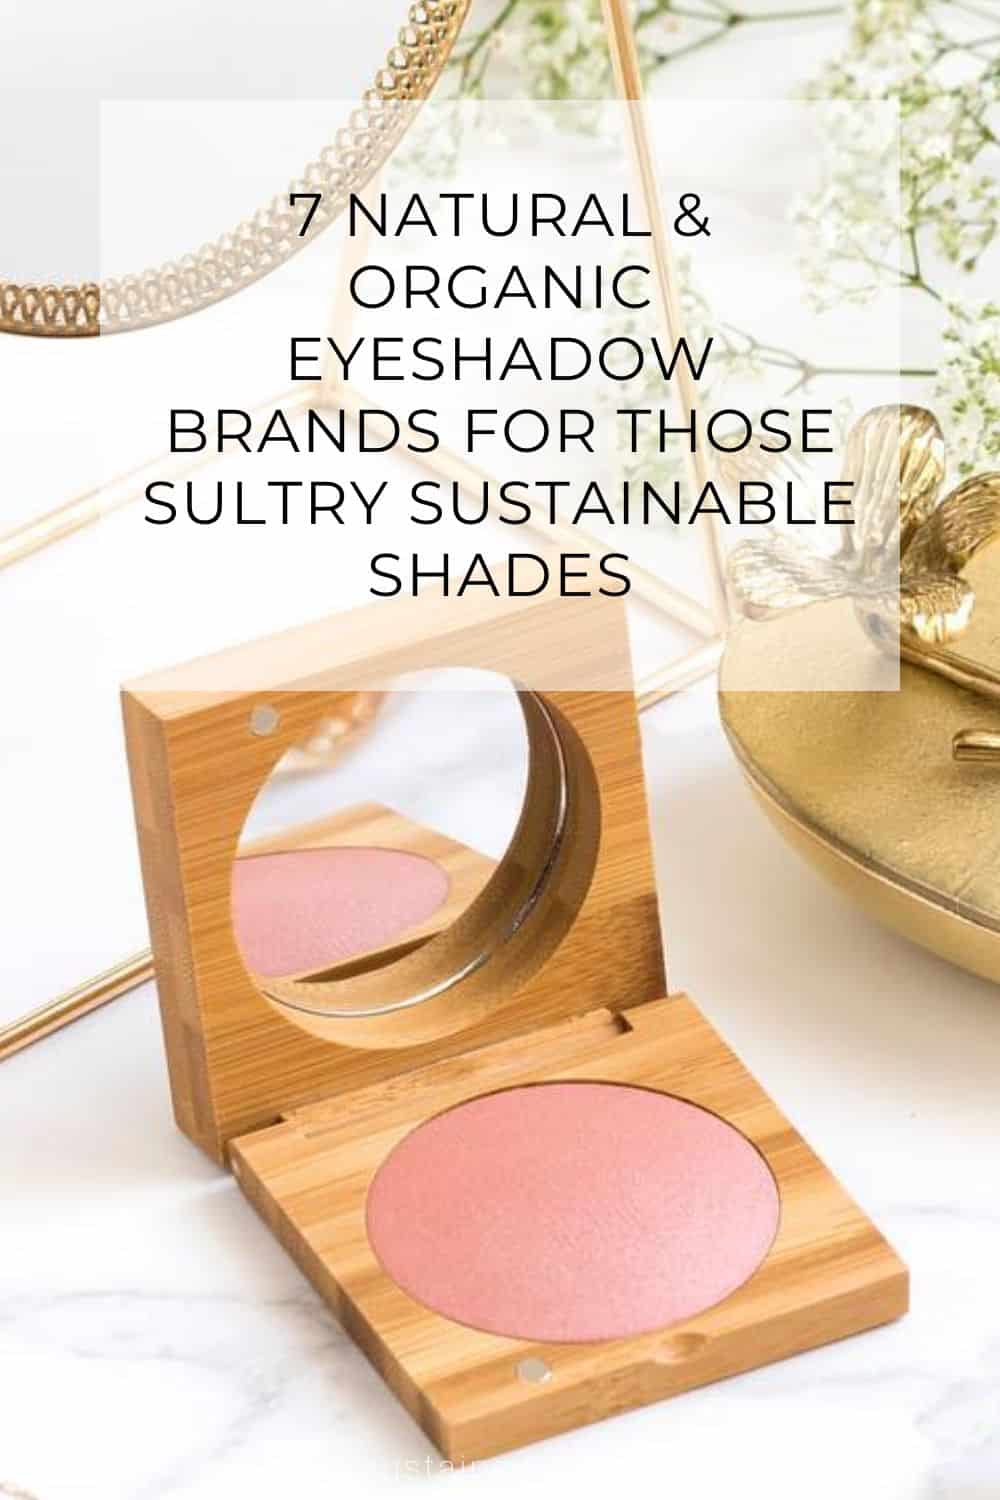 7 Natural & Organic Eyeshadow Brands For Those Sultry Sustainable Shades Image by Antonym #organiceyeshadow #organiceyeshadowpalette #naturalorganiceyeshadow #naturaleyeshadow #allnaturaleyeshadowpalette #naturalmakeupeyeshadow #sustainablejungle